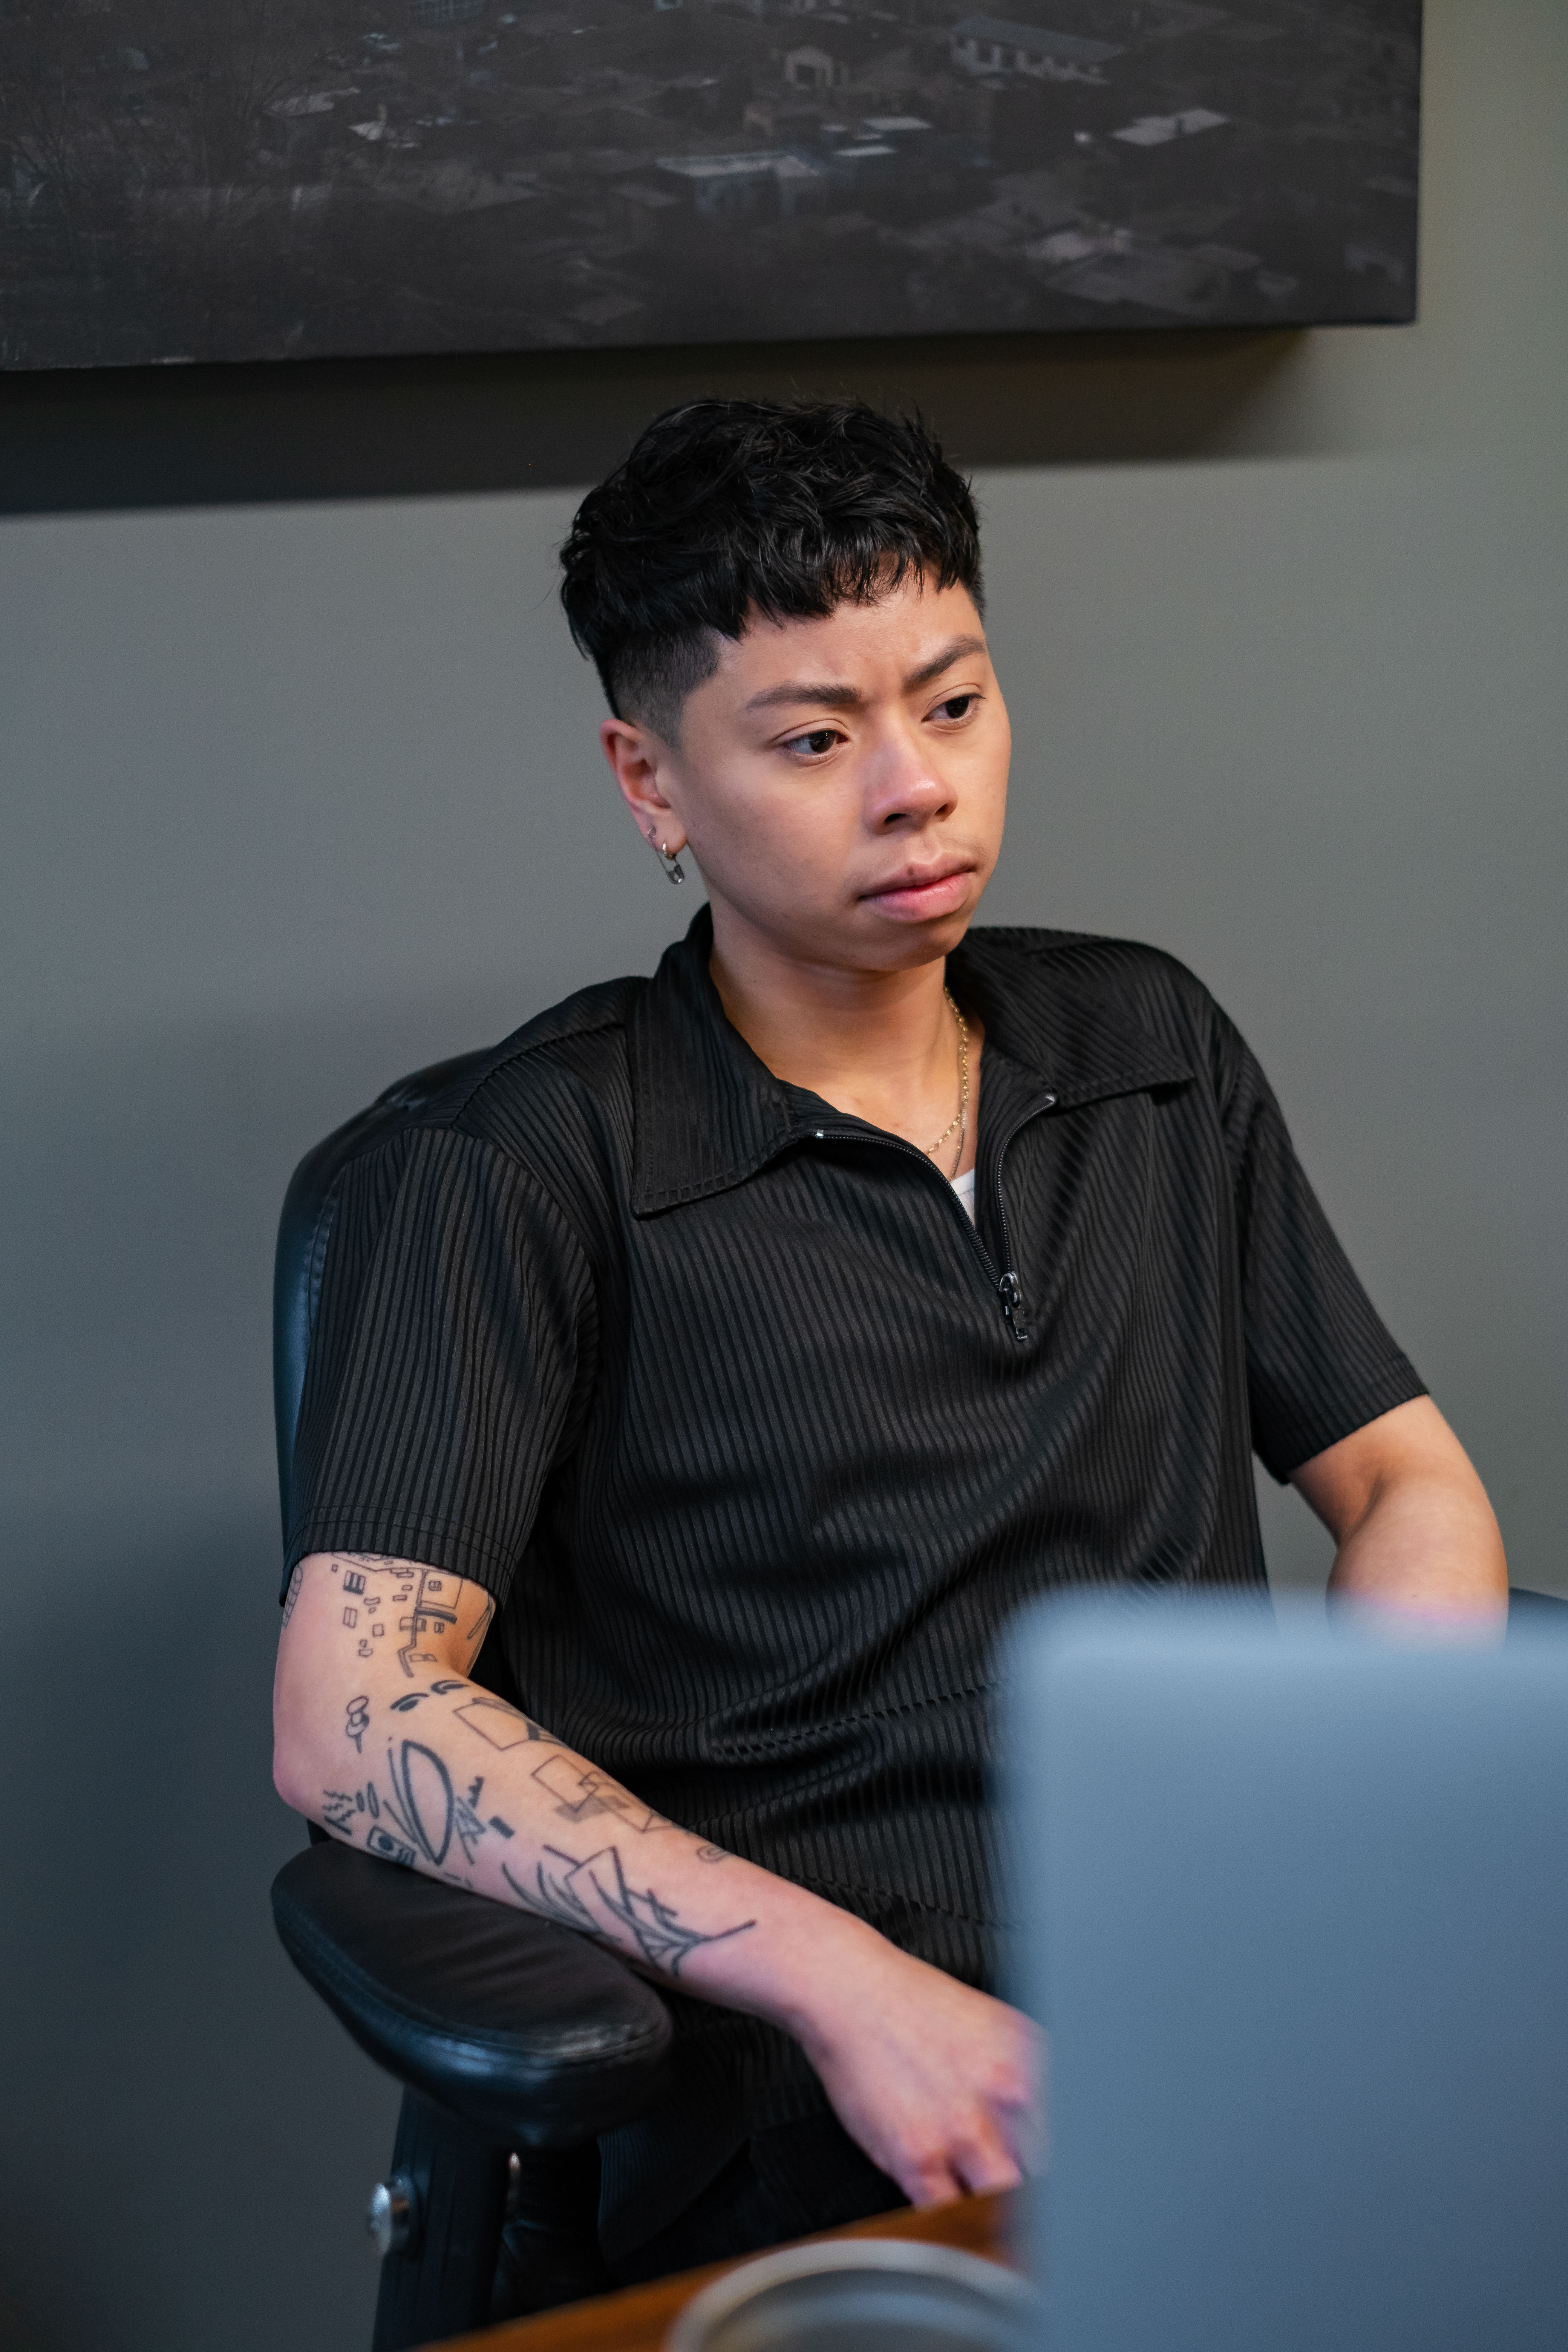 A non-binary person sitting behind a desk